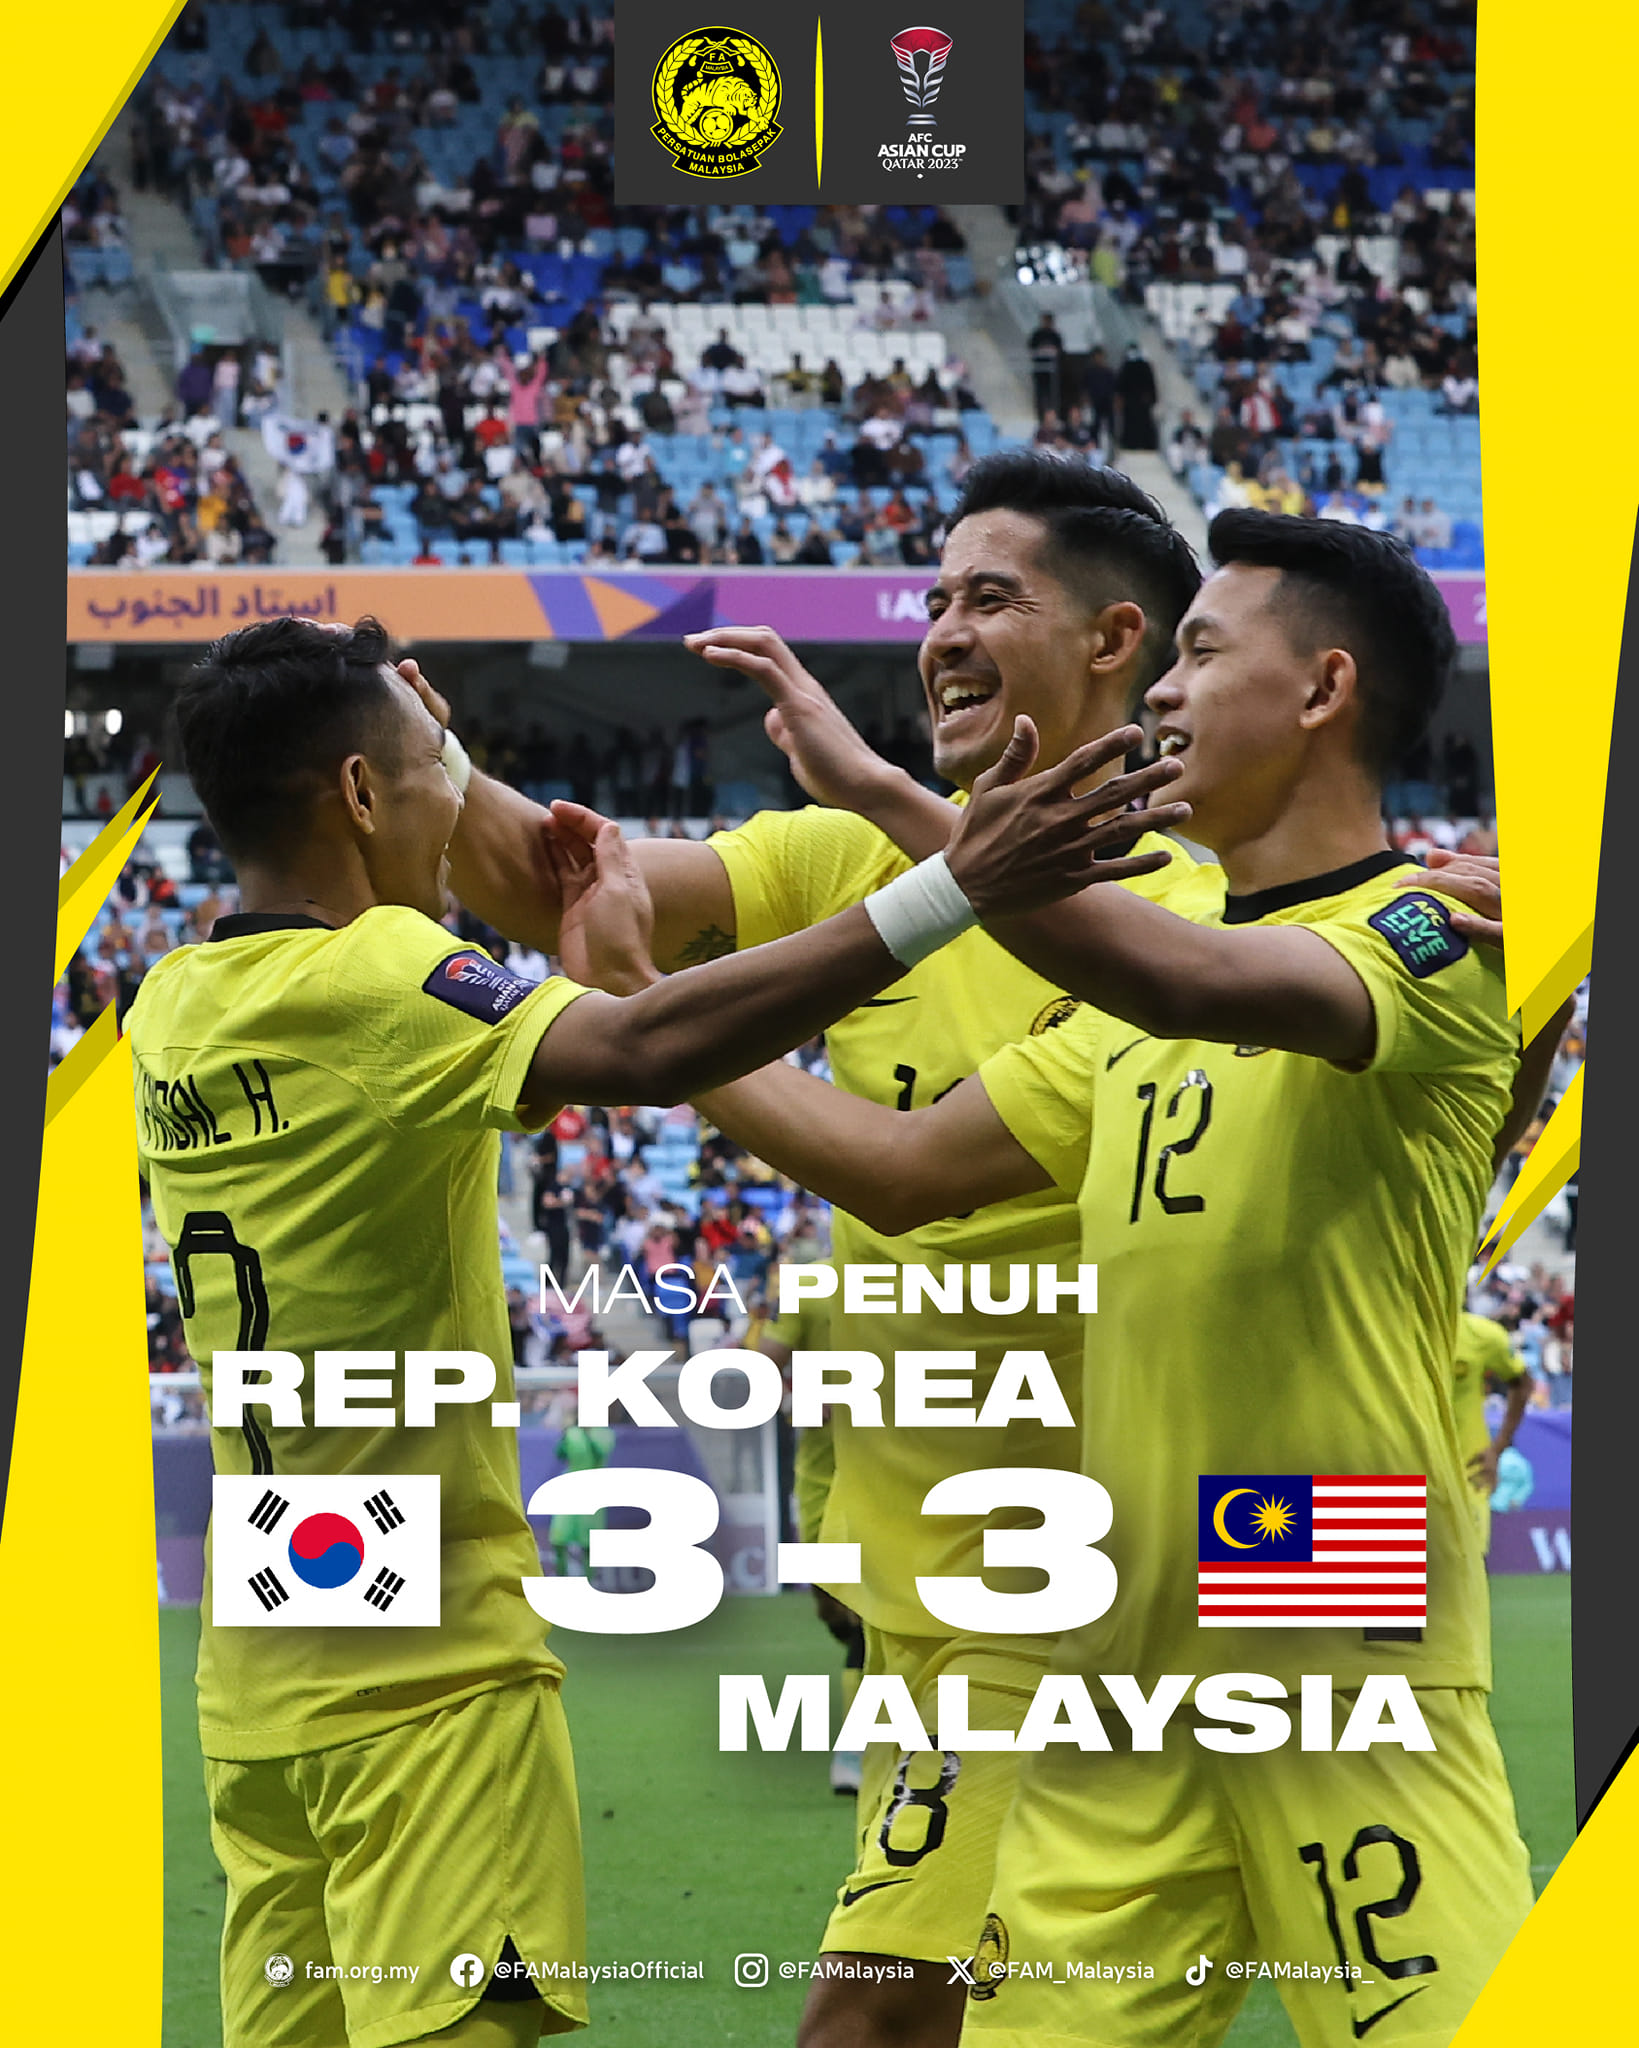 M'sia draws 3-3 against south korea at asian cup